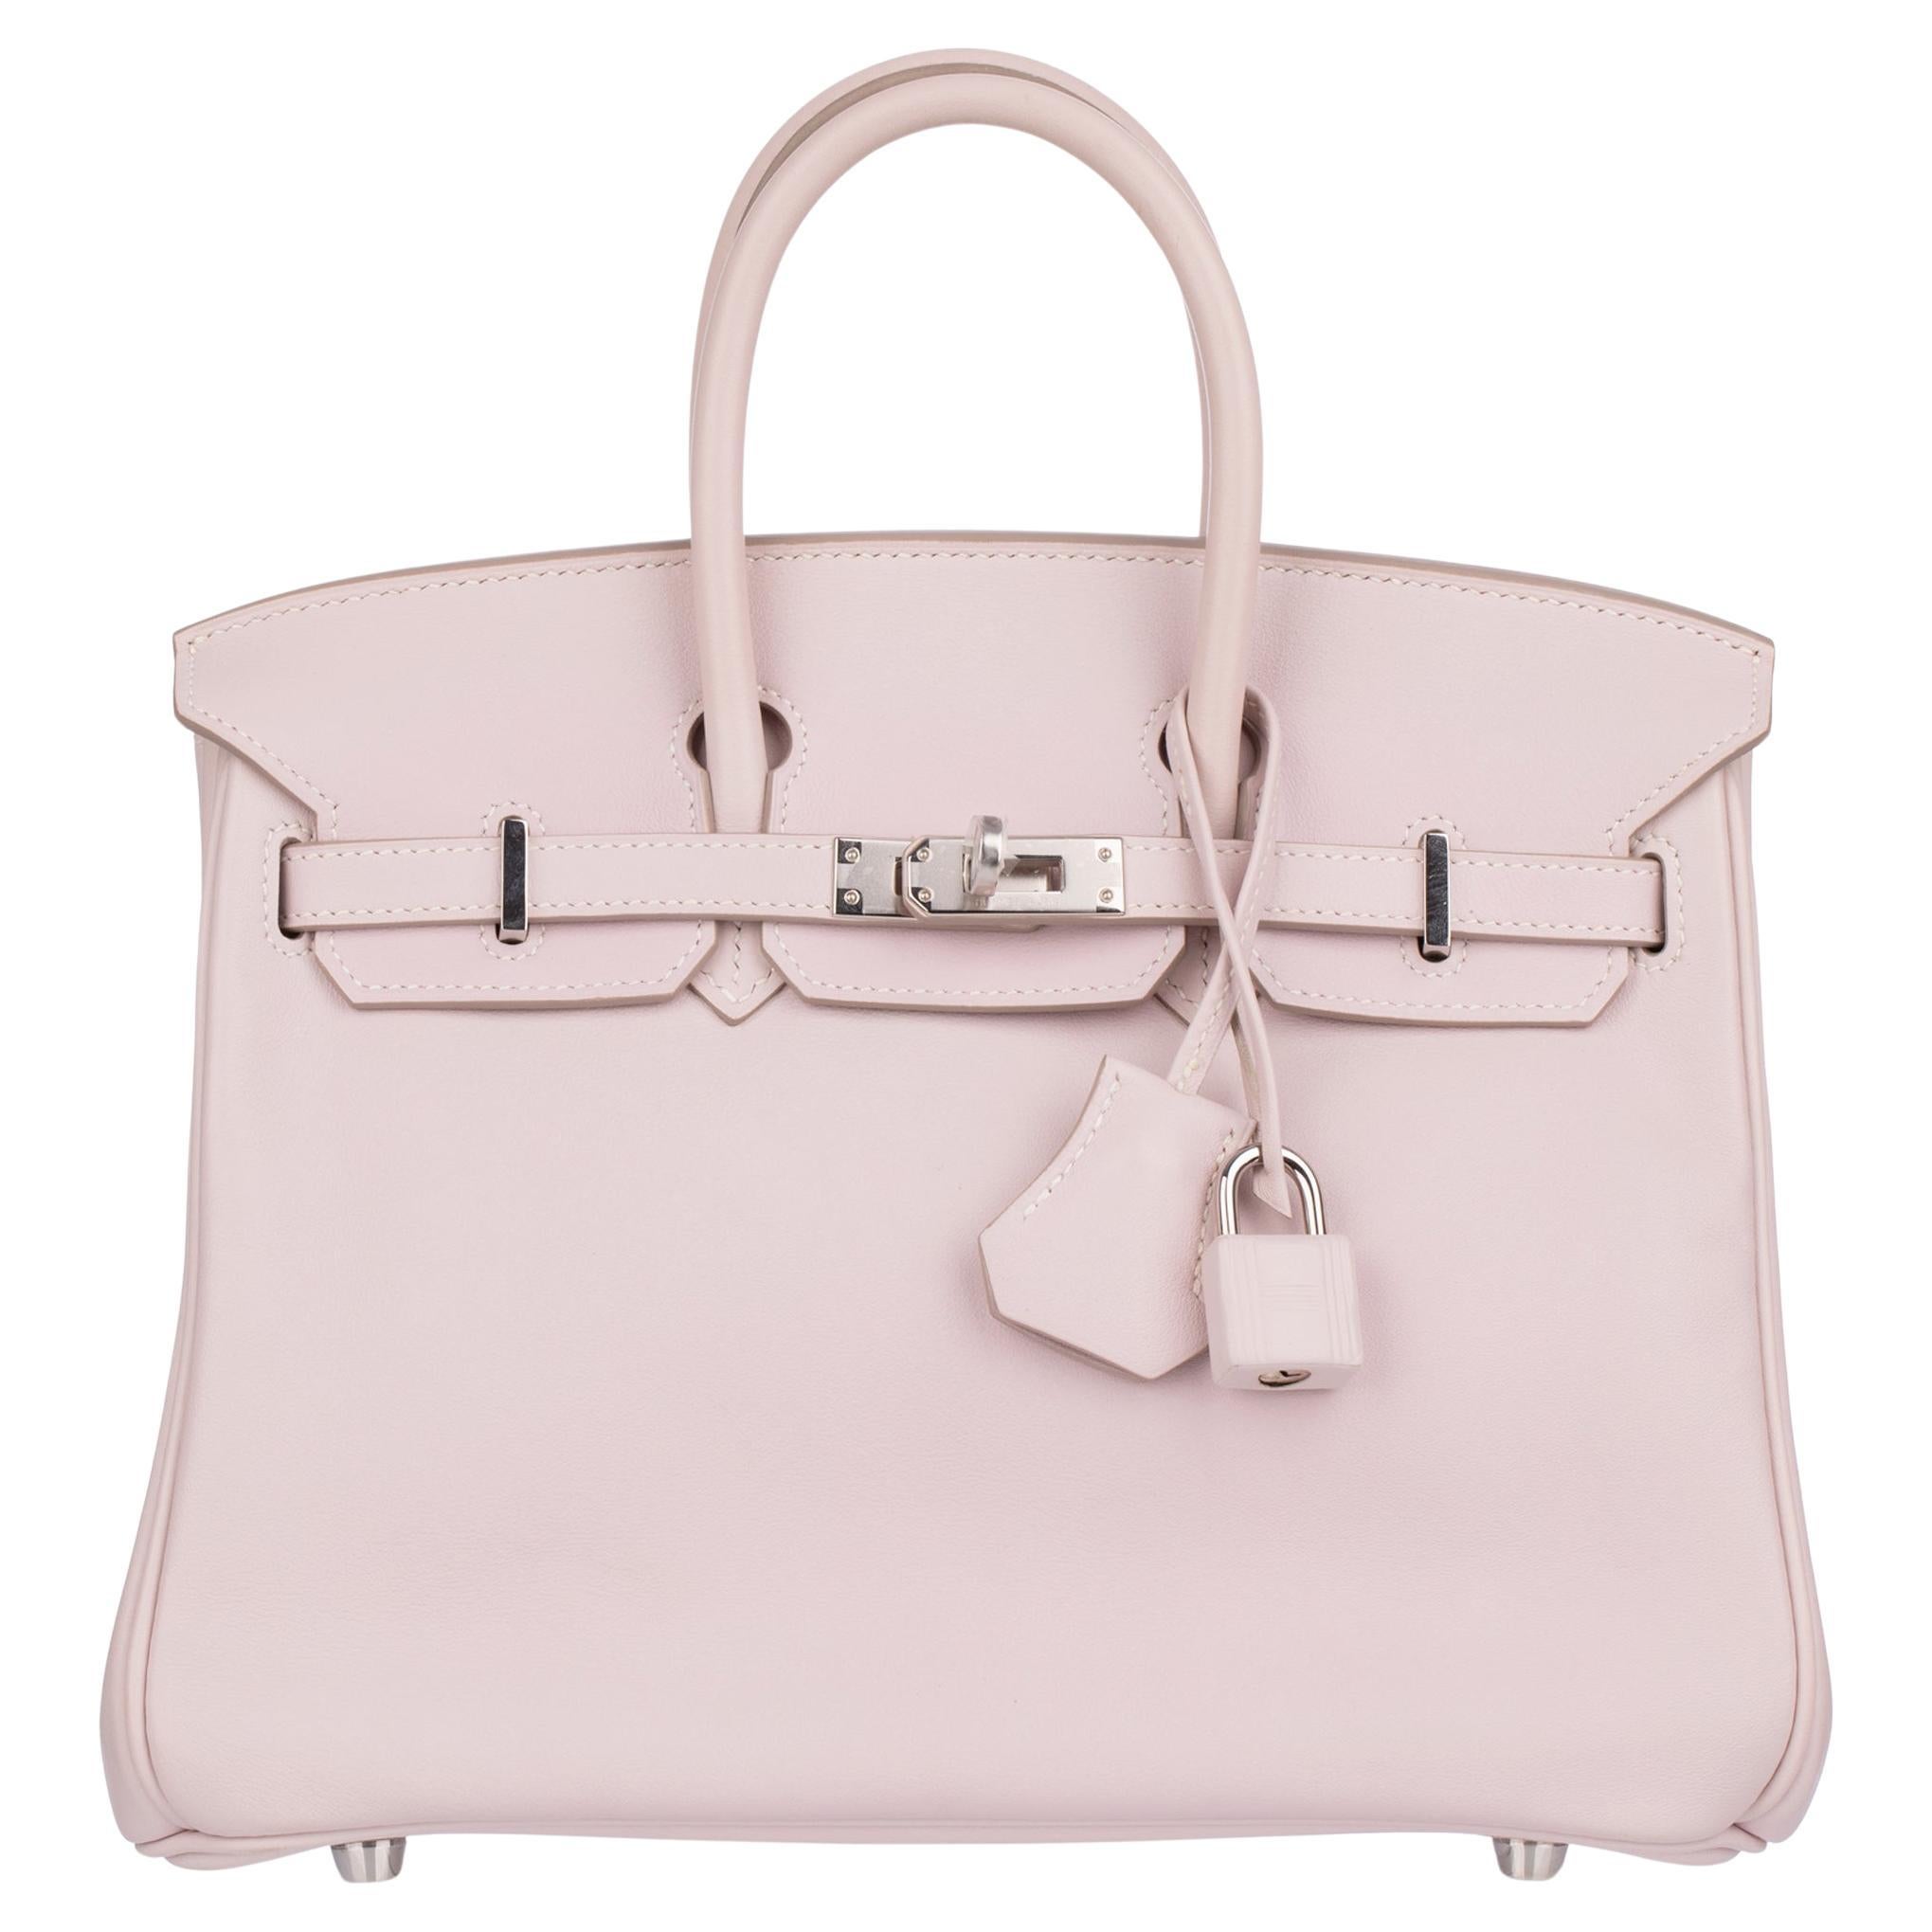 Who makes the best handbags?